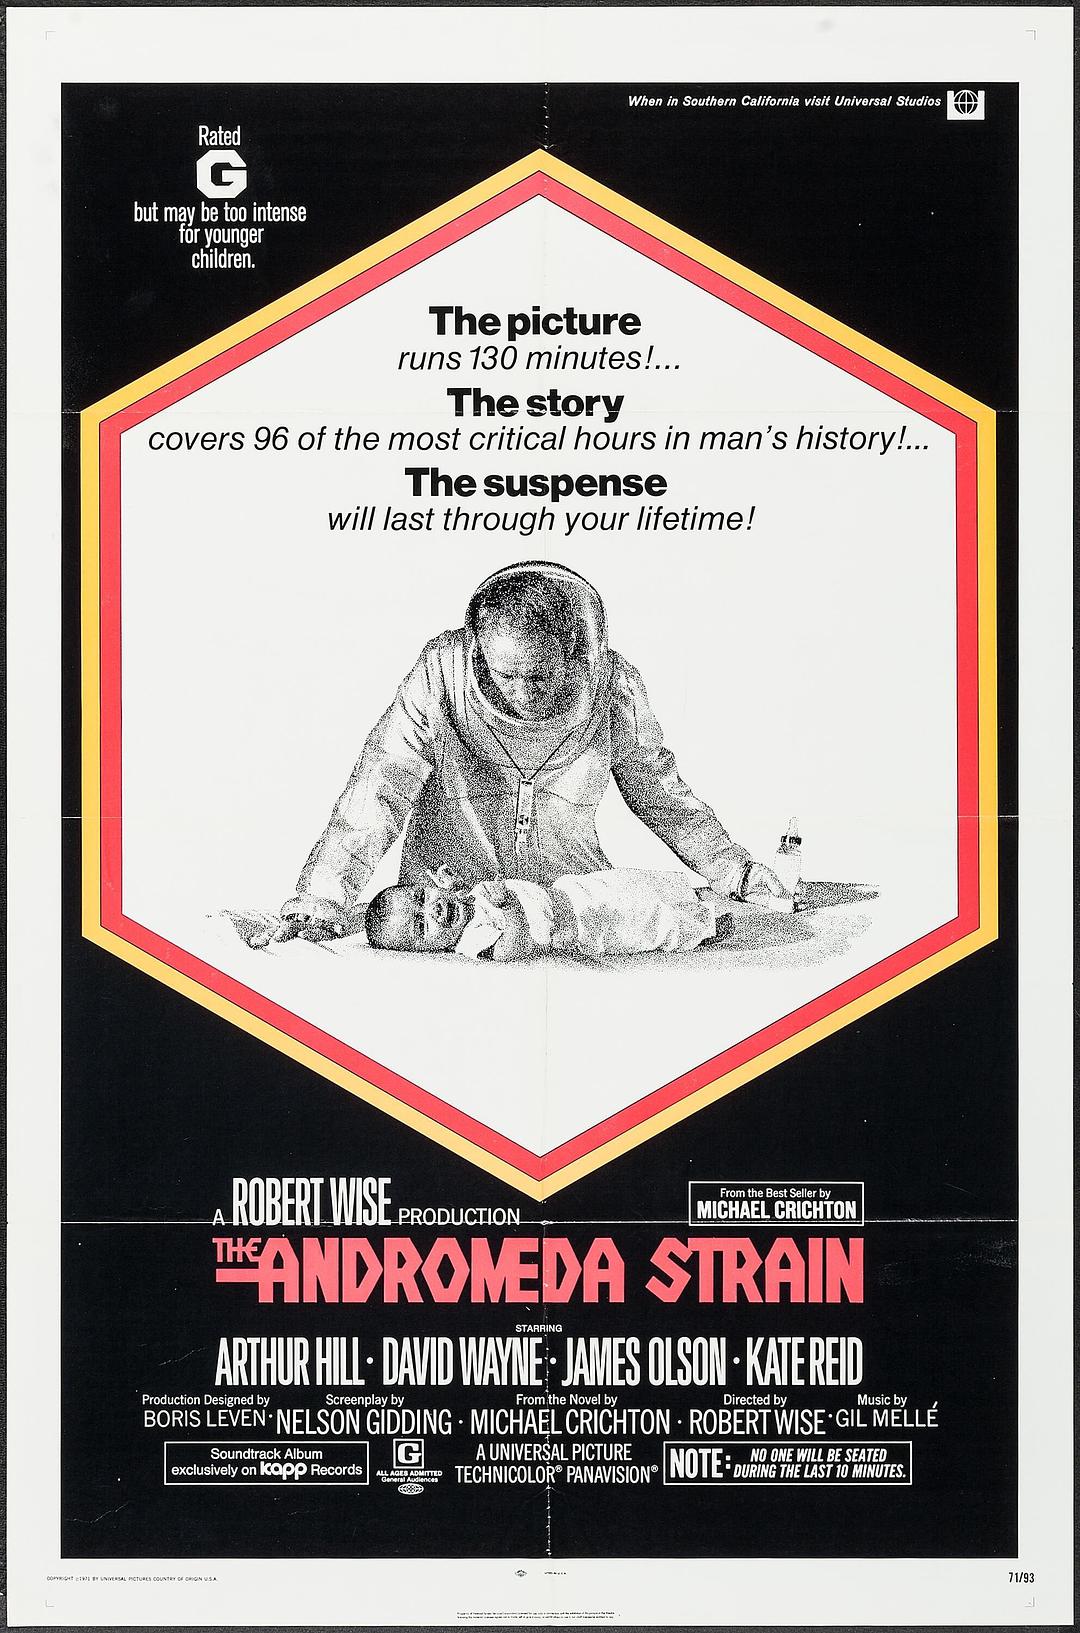 ˼ƽ/Ů The.Andromeda.Strain.1971.REMASTERED.1080p.BluRay.X264-AMIABLE 13.13-1.png